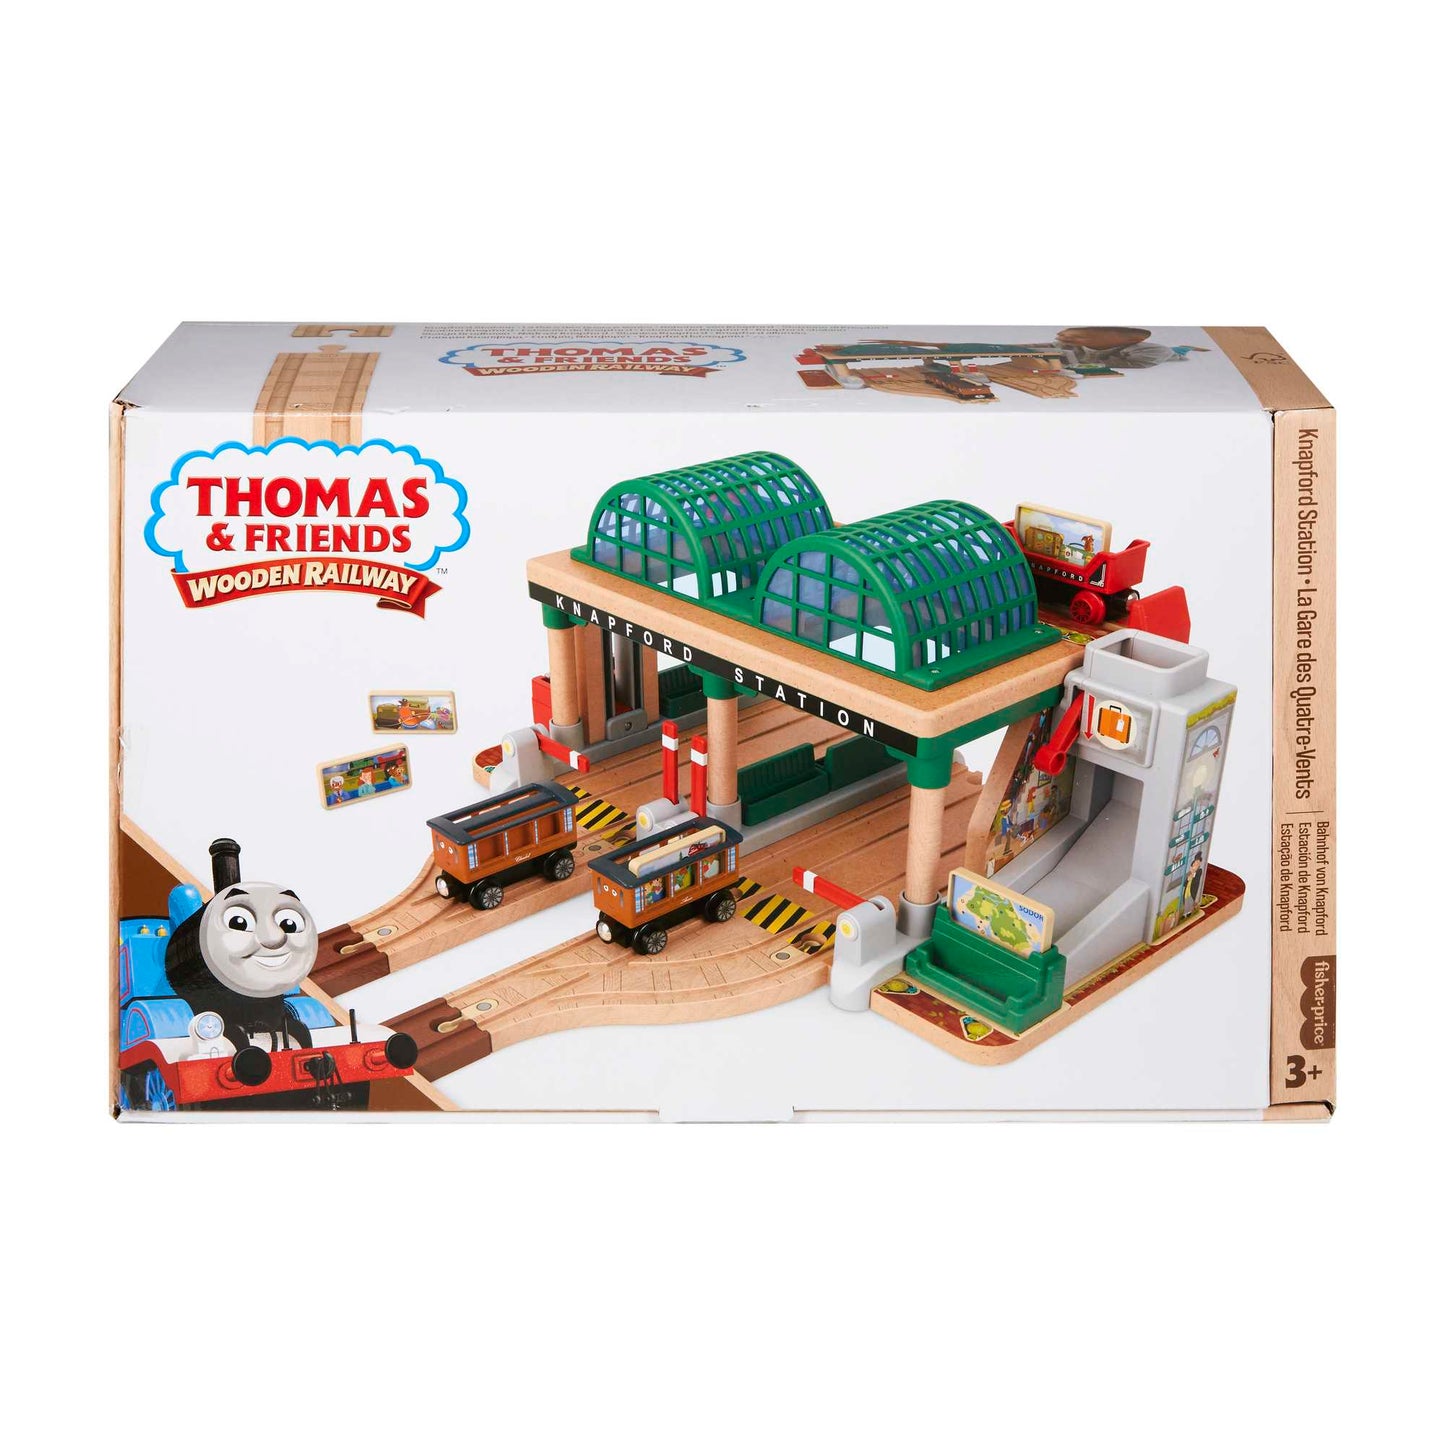 Fisher-Price Thomas & Friends Wooden Railway Knap ford Station Passenger Pickup Playset